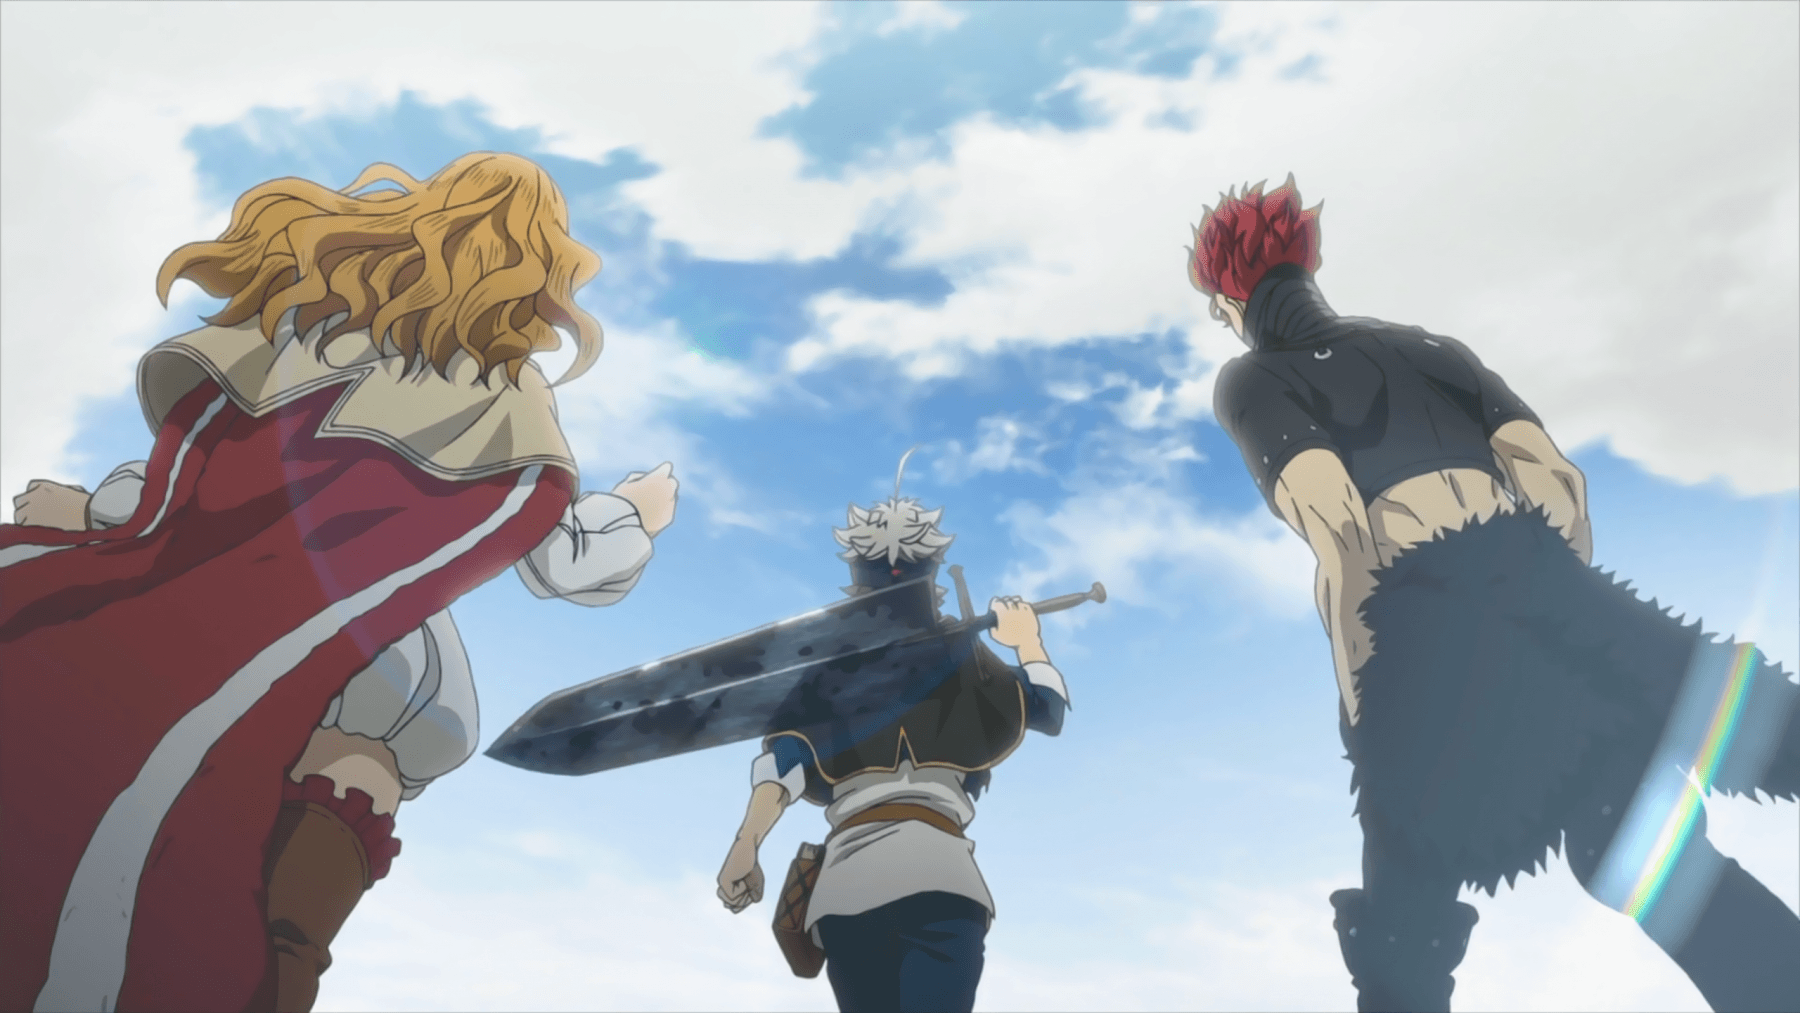 HD Black Clover Anime PC Wallpapers - Wallpaper Cave